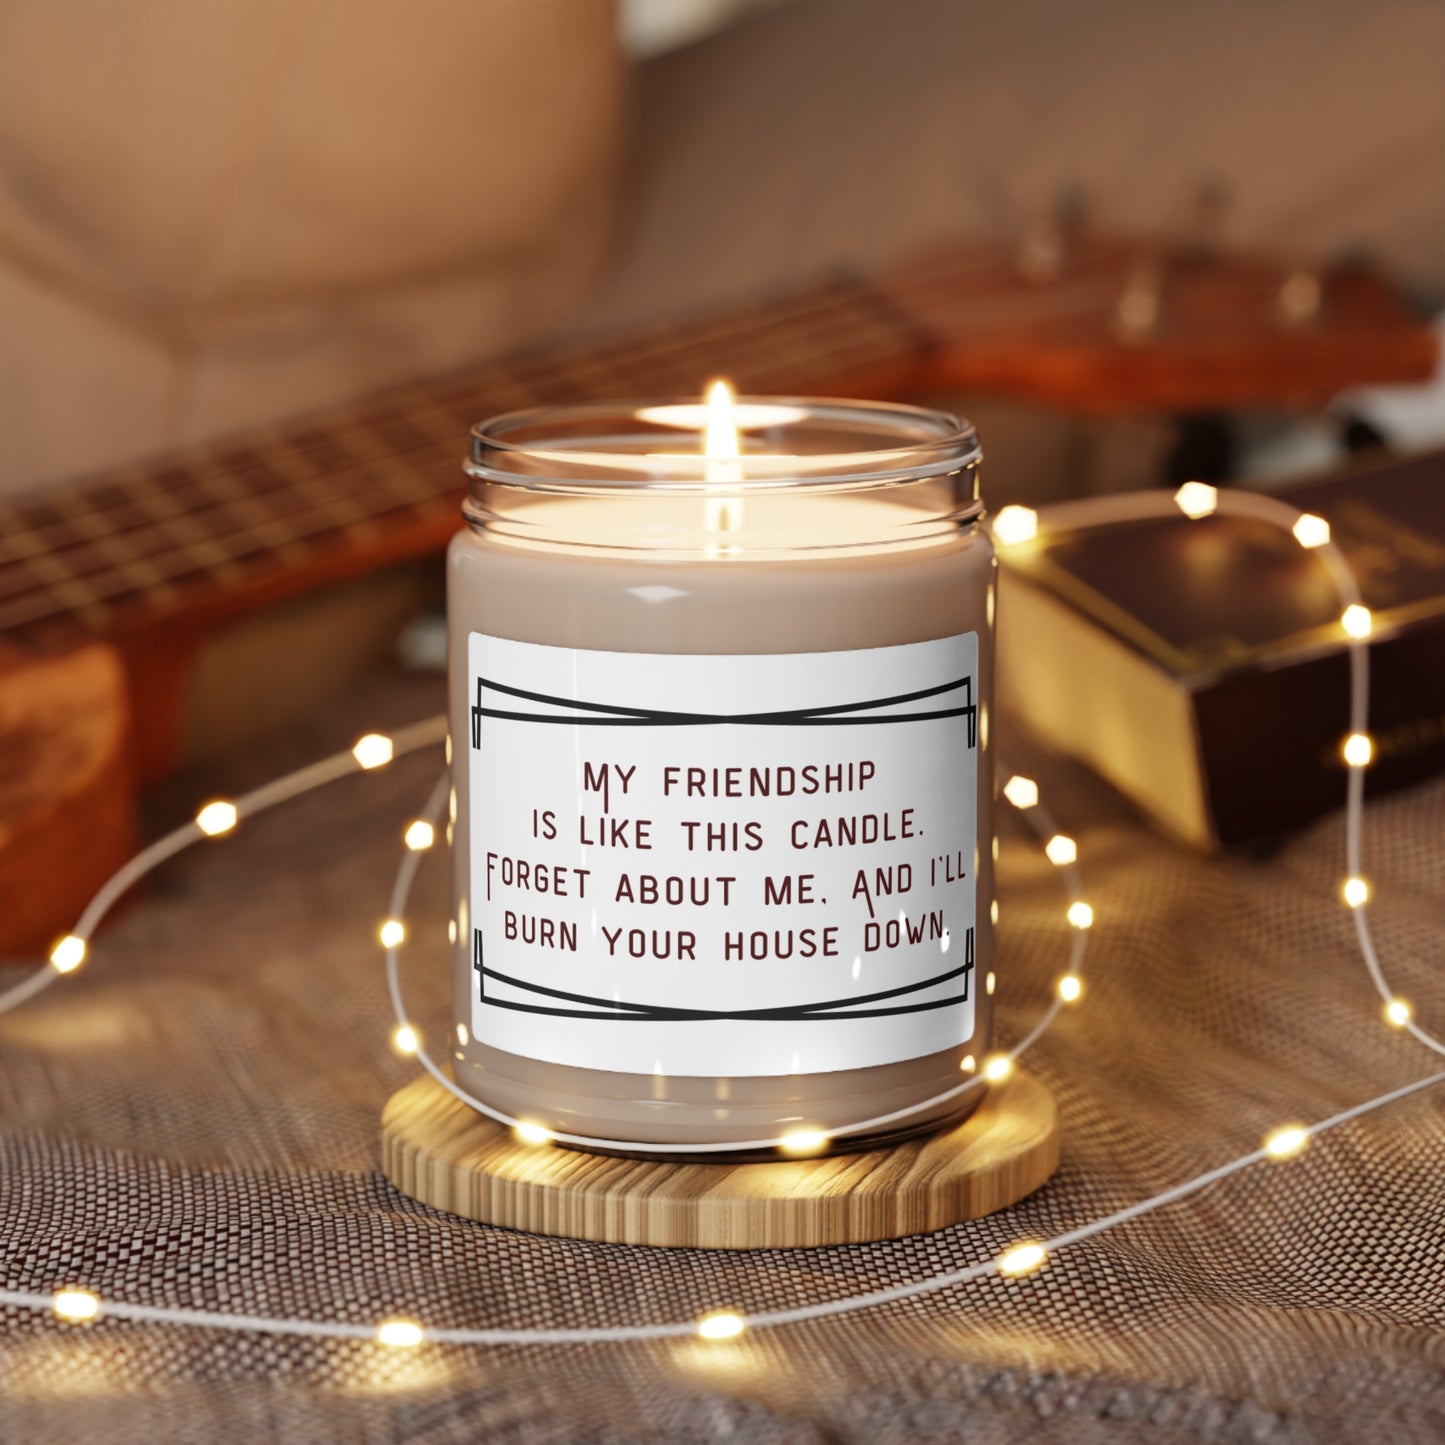 Scented Soy Candle, 9oz.  My friendship is like this candle, forget about me and I will burn the house down